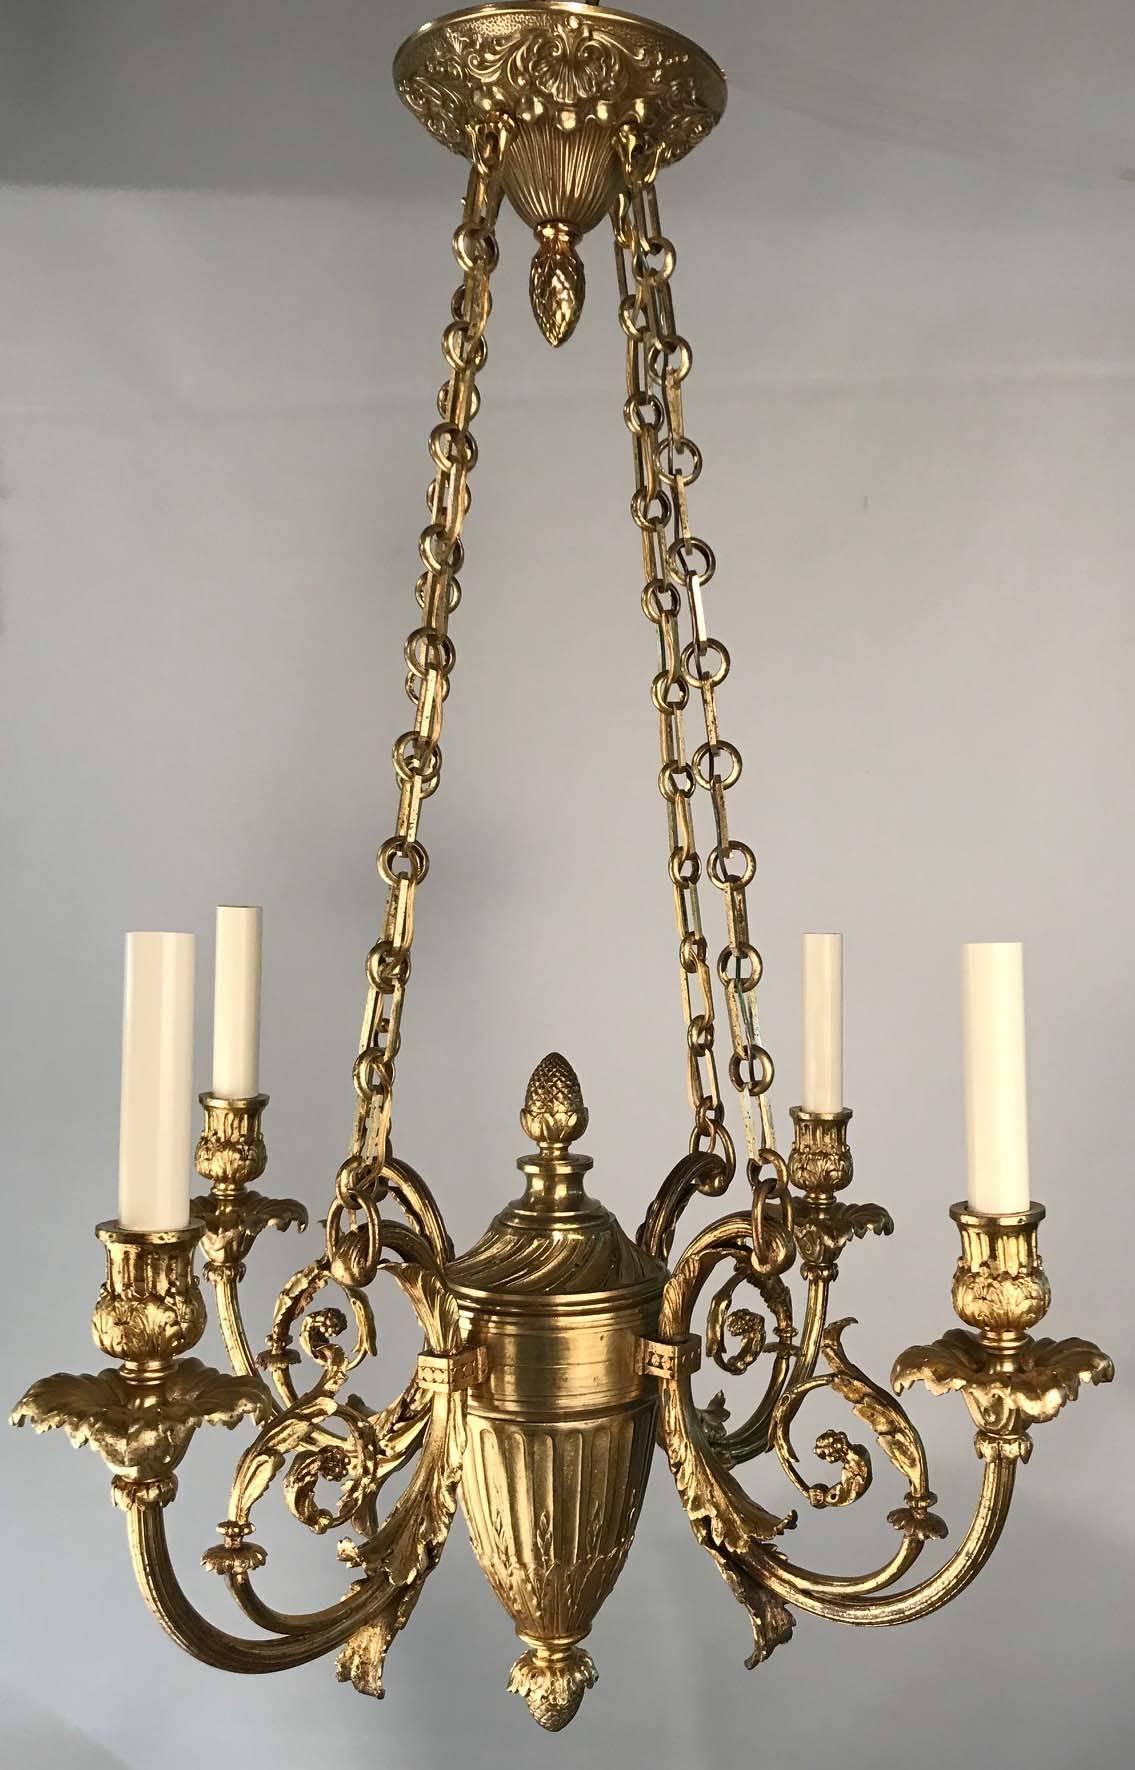 This small but exquisite fixture is of unusually high quality. Diminutive lighting of this type is difficult to find. It has four scrolling arms ,cast with acanthus, emitting from a central turned hub. From the pineapple finial, emblematic of